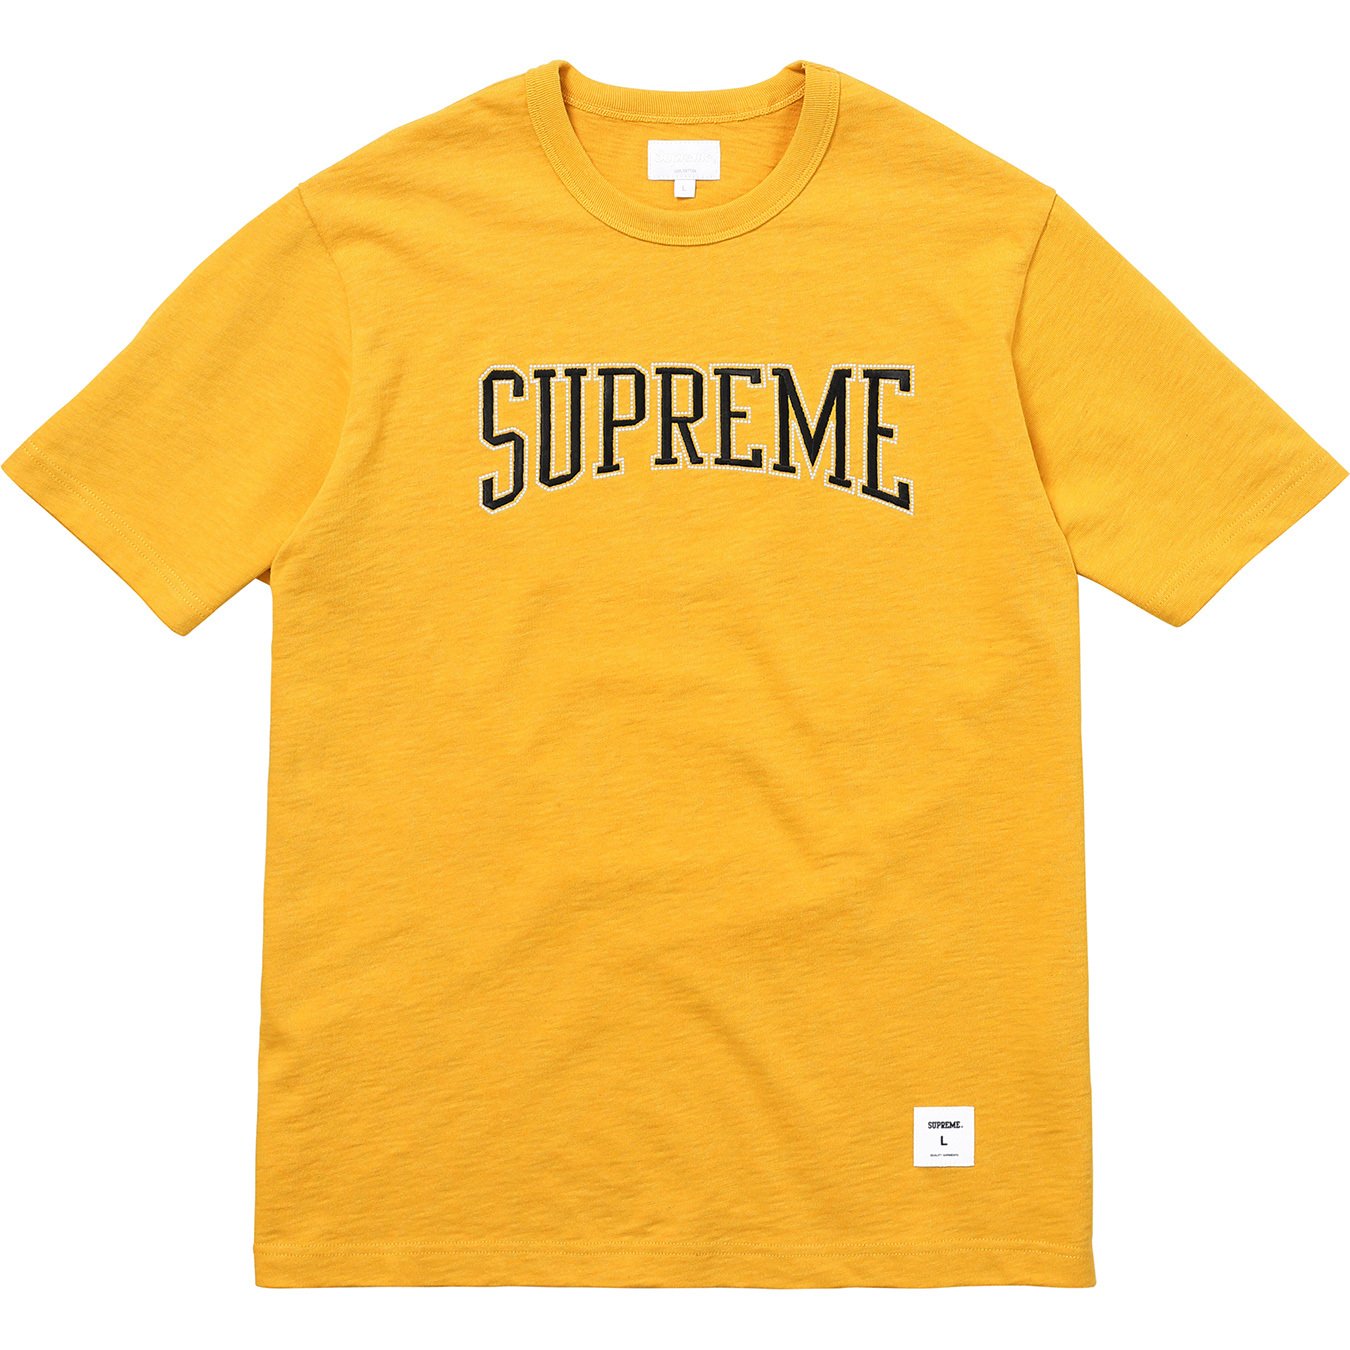 Dotted Arc Top - Supreme Community